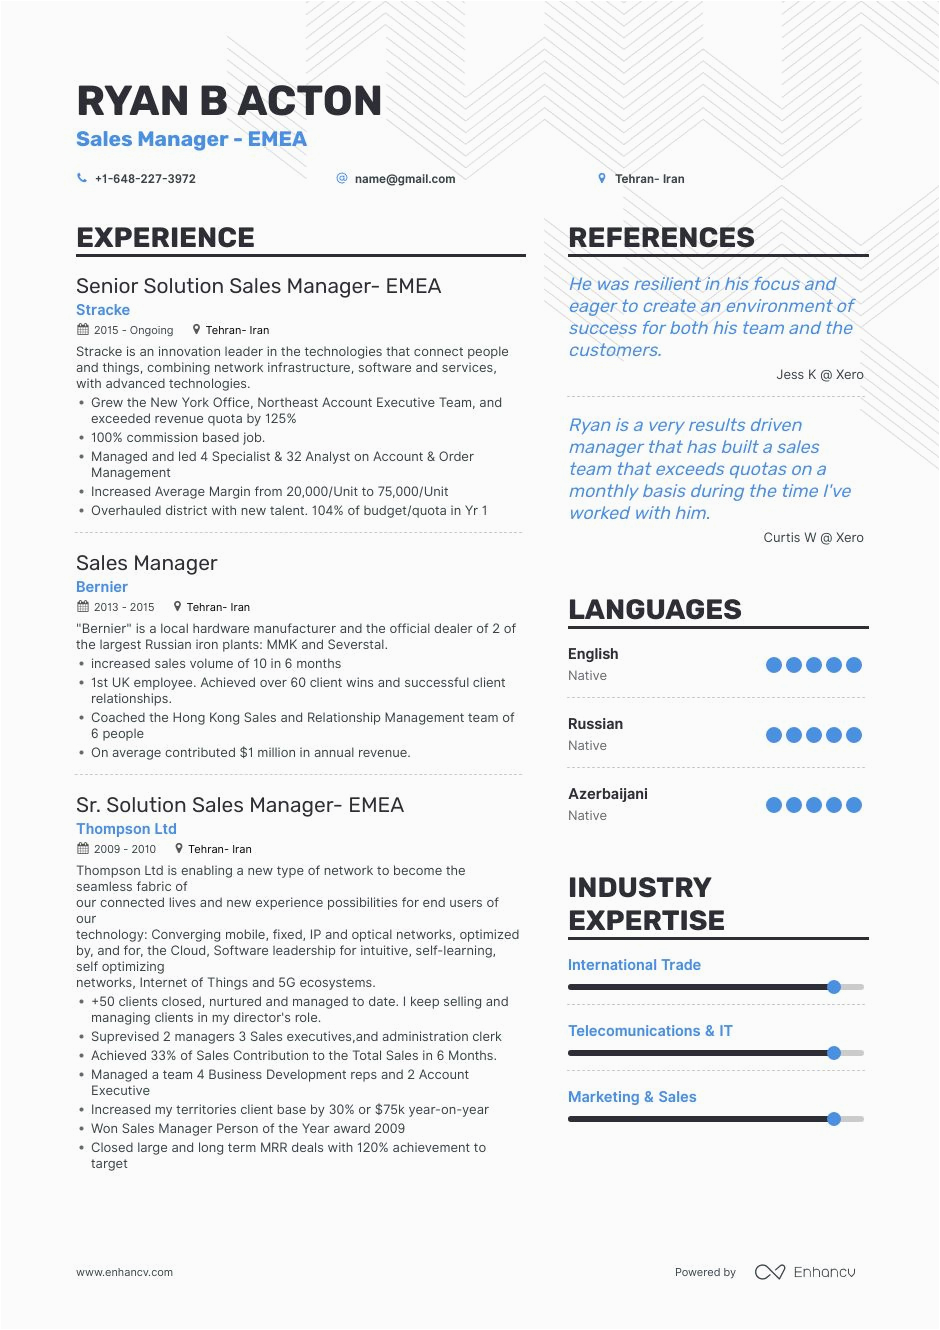 Sample Resume Headline for Sales Manager top Sales Resume Examples Expert Tips